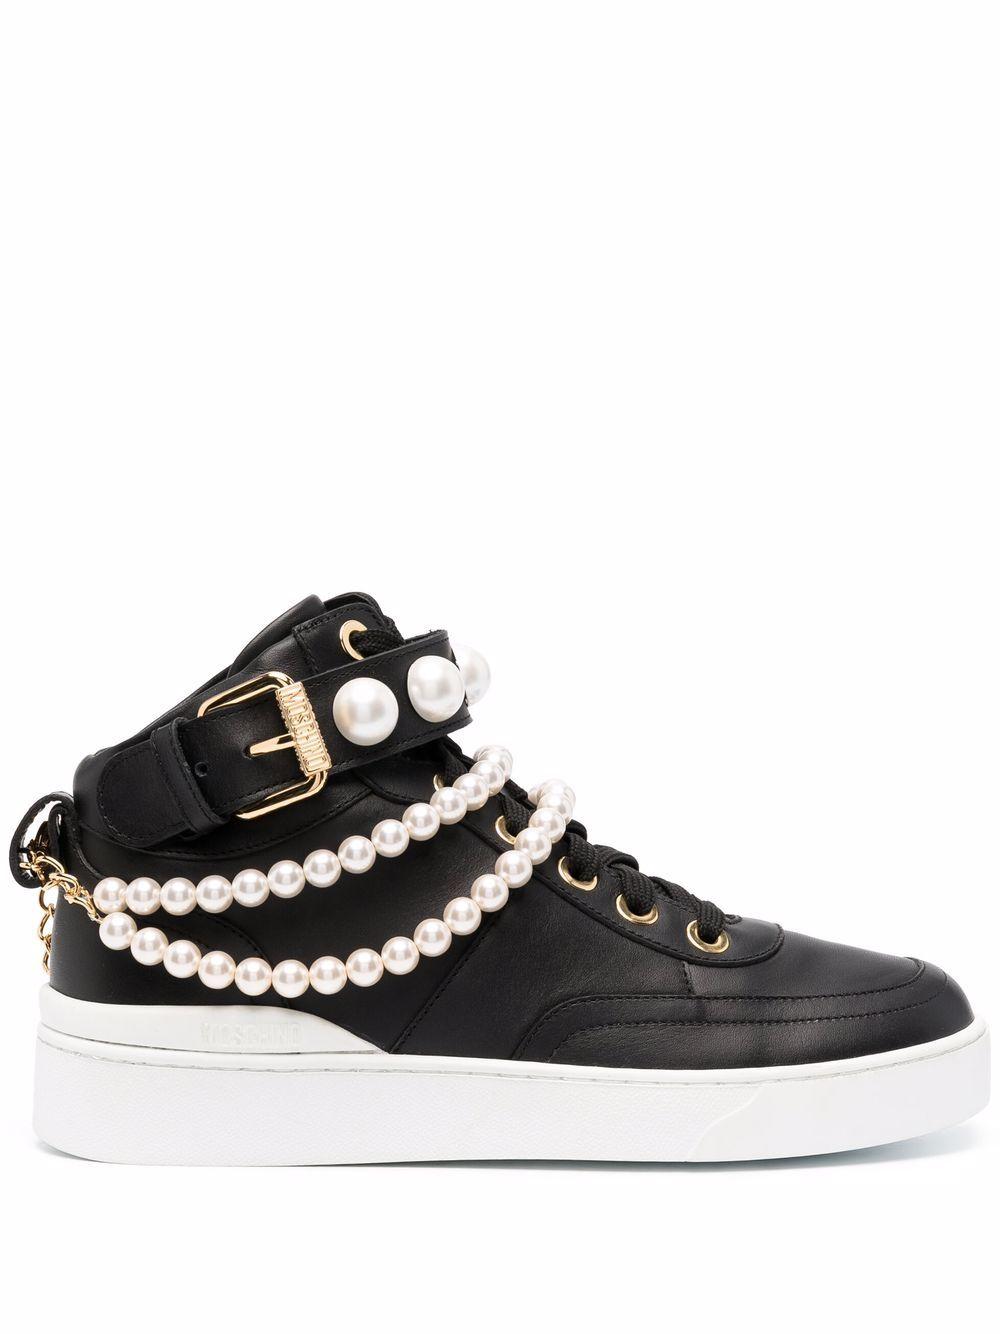 Moschino Pearl-embellished Mid-top Sneakers in Black | Lyst